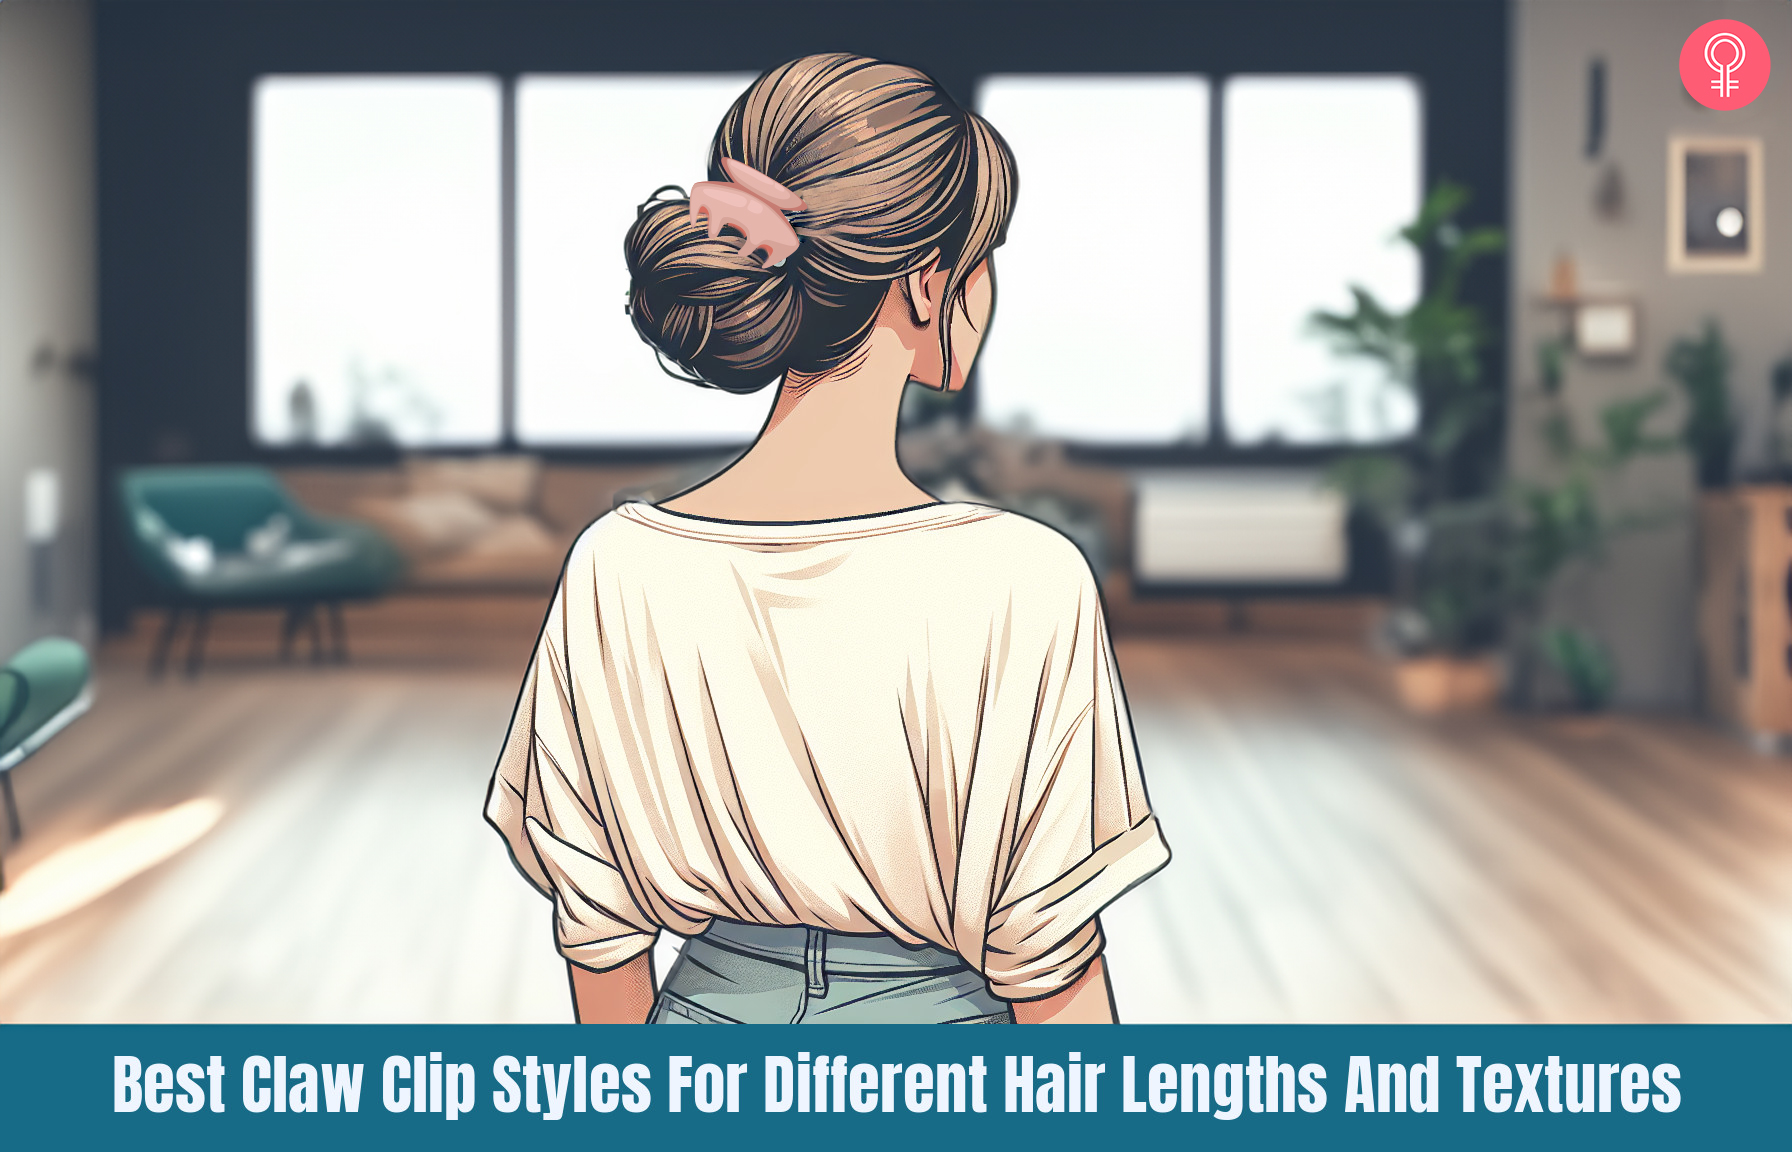 30 Best Claw Clip Styles For Different Hair Lengths And Textures